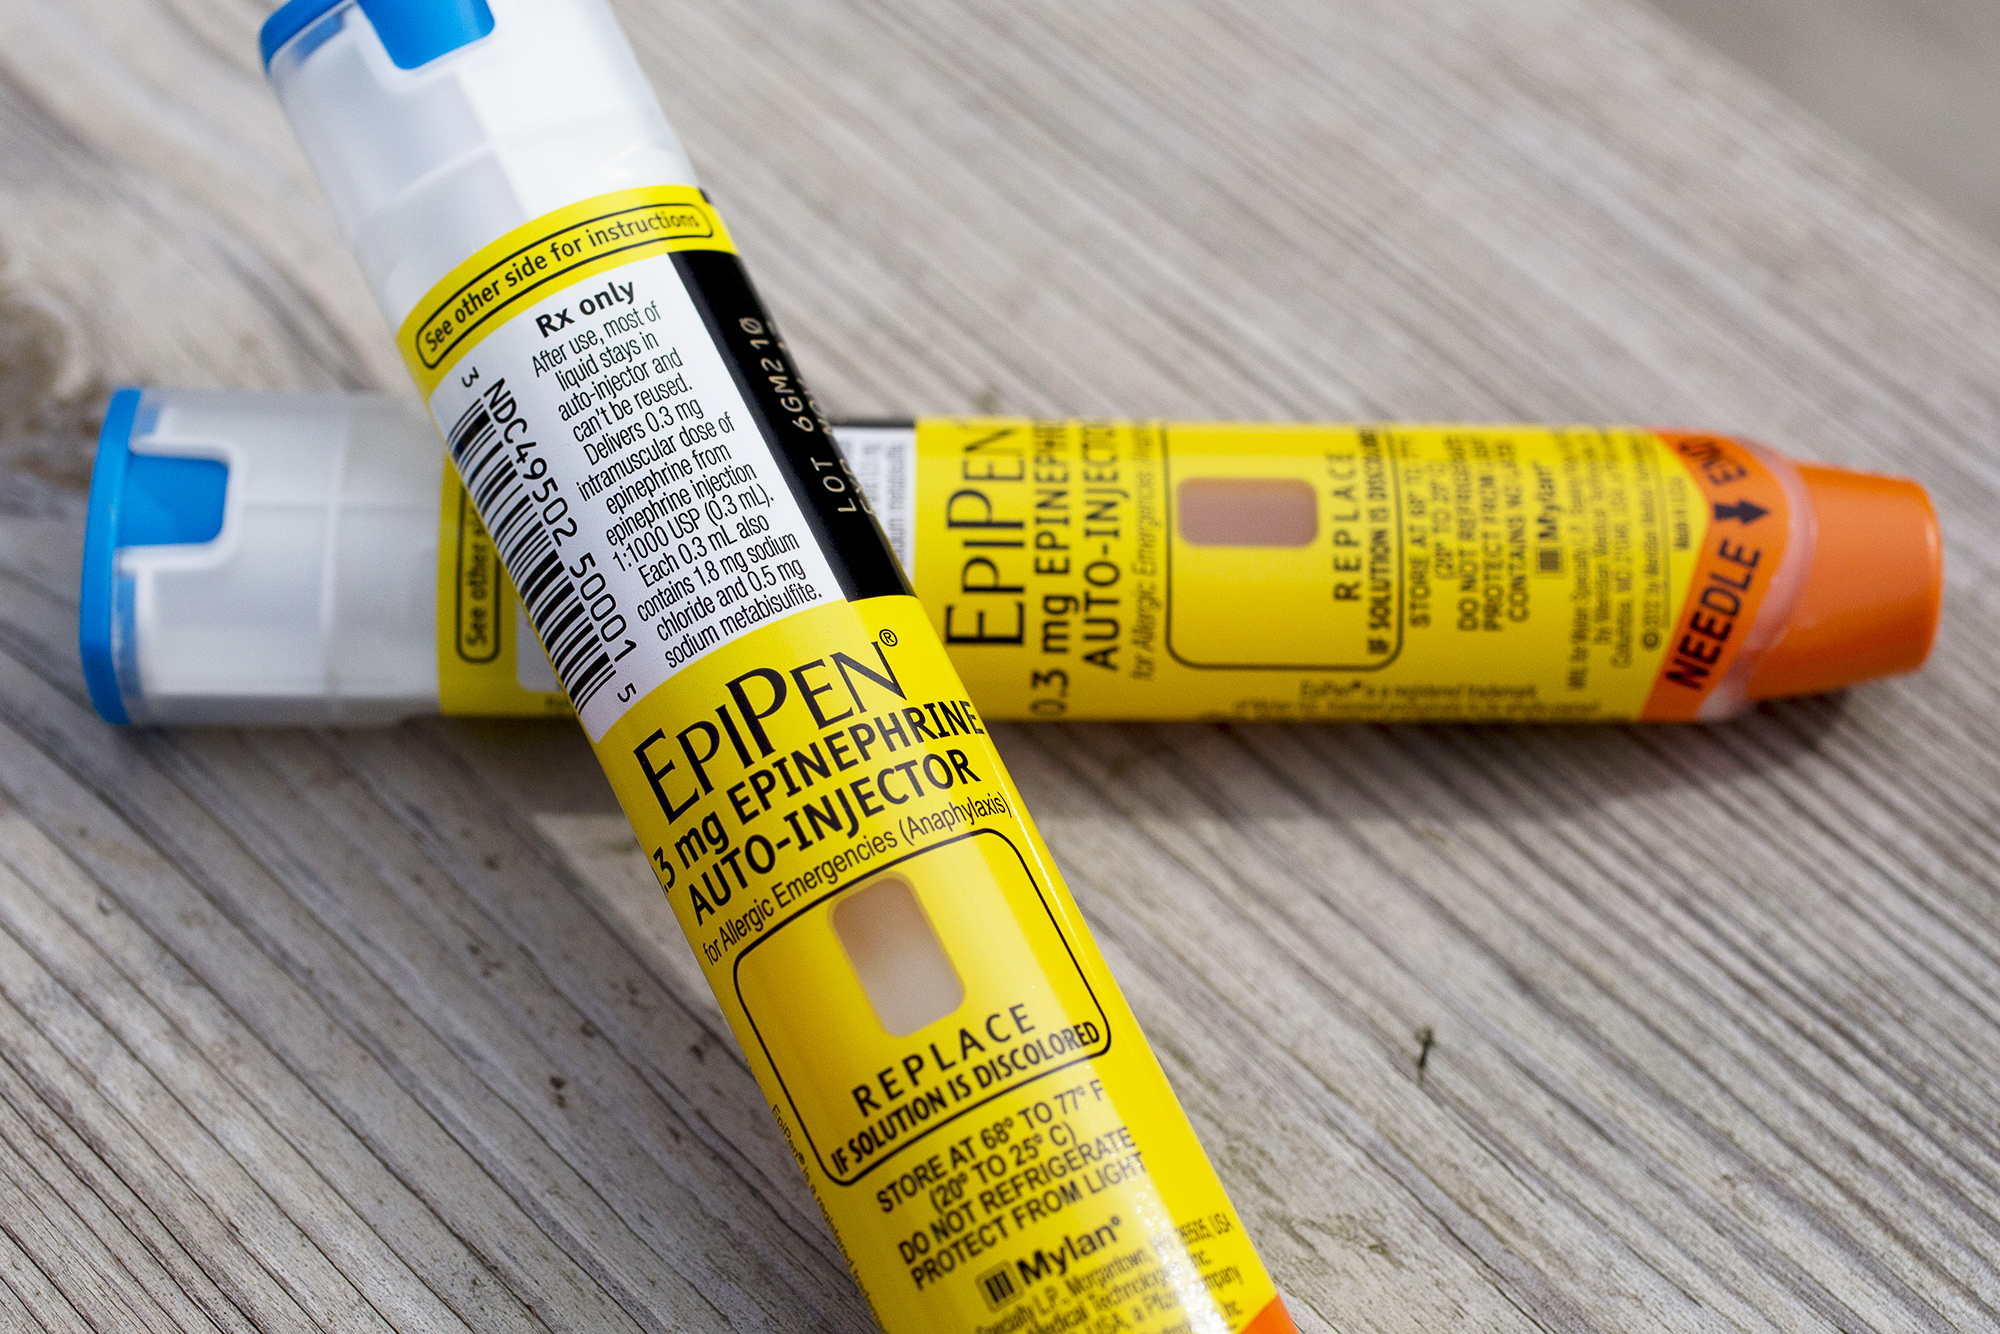 Mylan, the maker of EpiPen, says it will sell a generic version for $300 for a two-pack, a price that consumer advocates say is still too high. The device is used to treat severe allergic reactions. (Photo by Daniel Acker/Bloomberg via Getty Images)